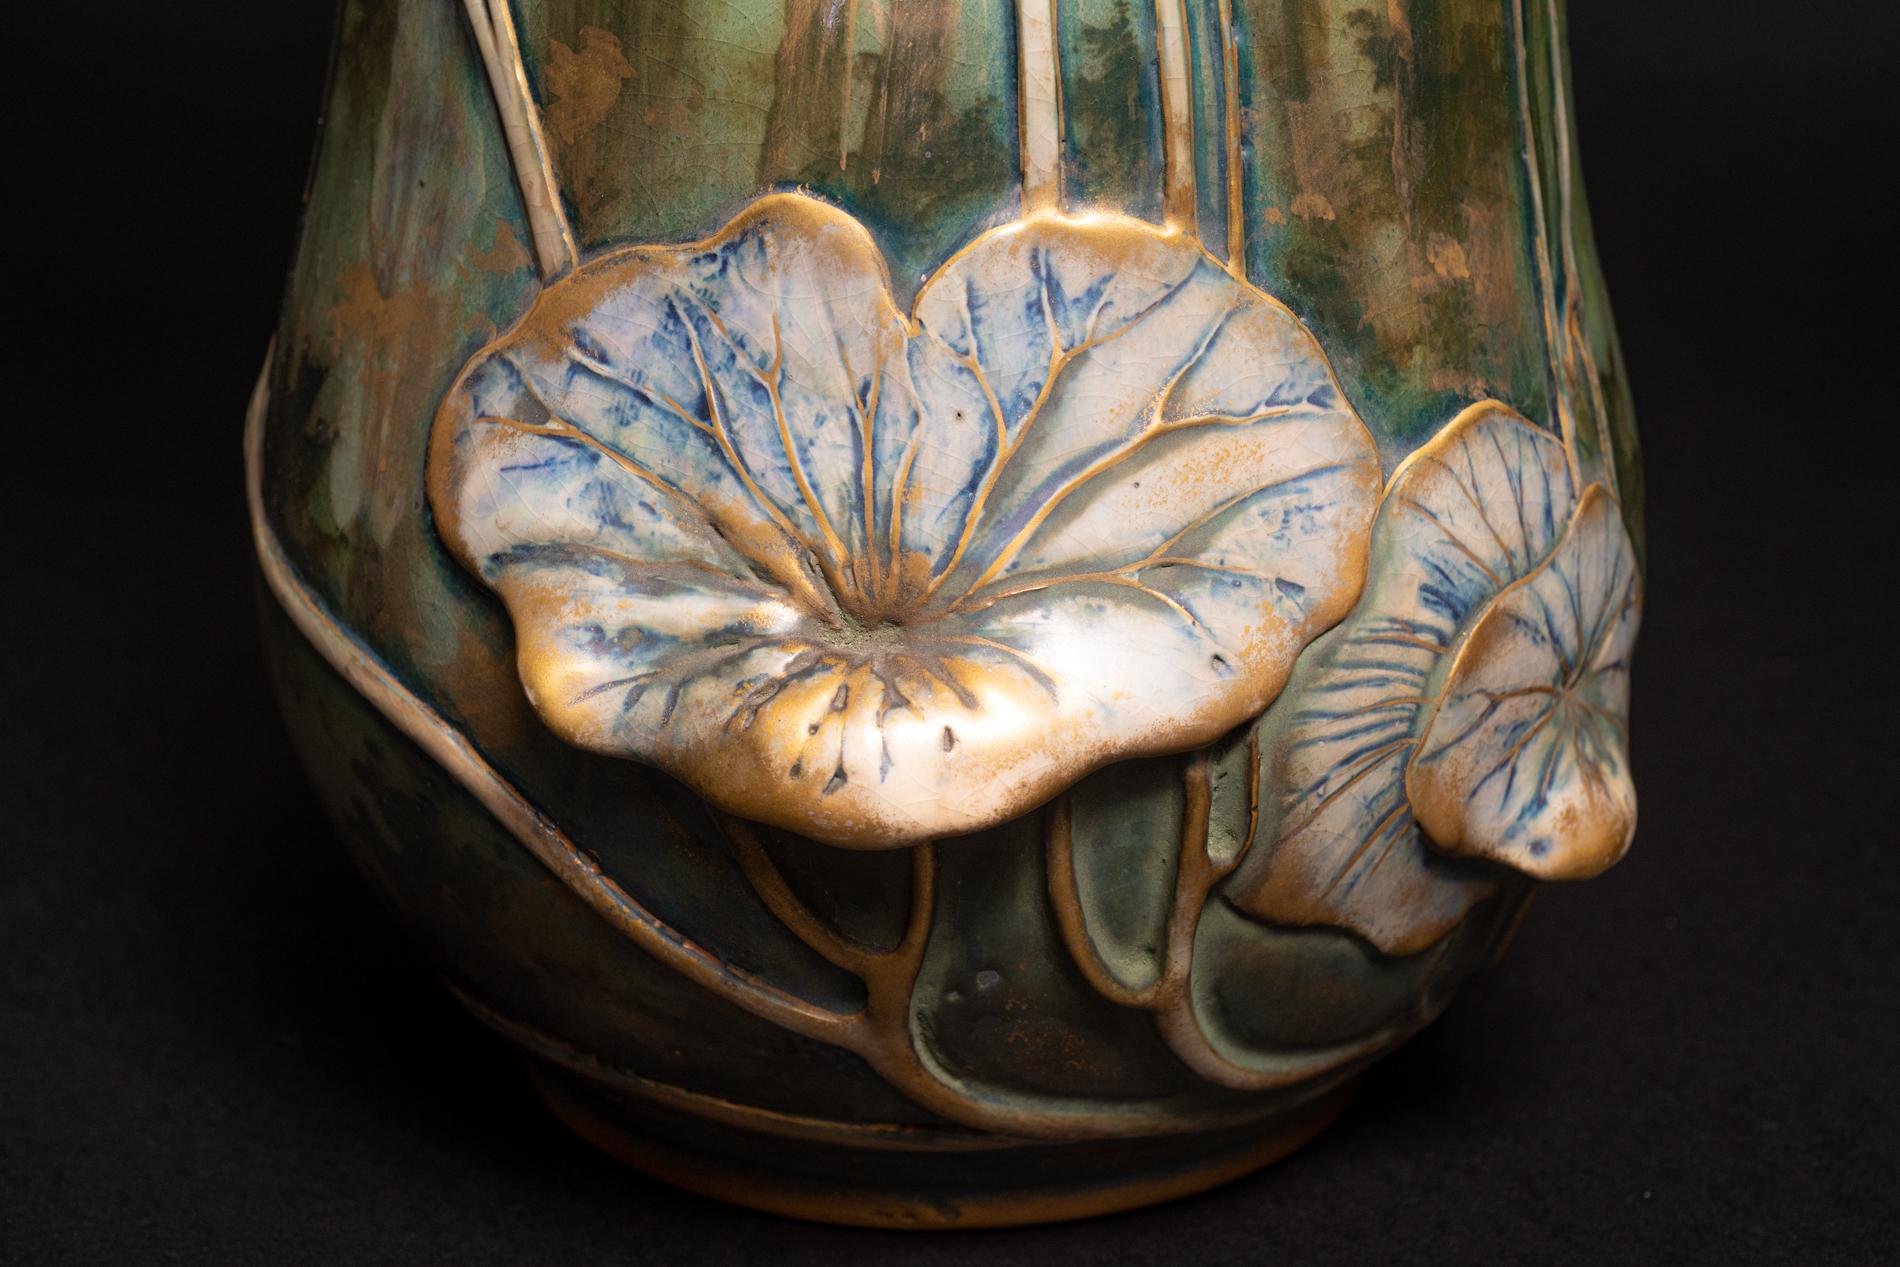 
NOCTURNAL RISING BAT VASE by AMPHORA, Model #668, c. 1900, in porcelain with applied detailing of bats, fruiting stalks and lilies interpreted as opium poppies, the vase has an iridescent pink underglaze that is enhanced with gold paint and a